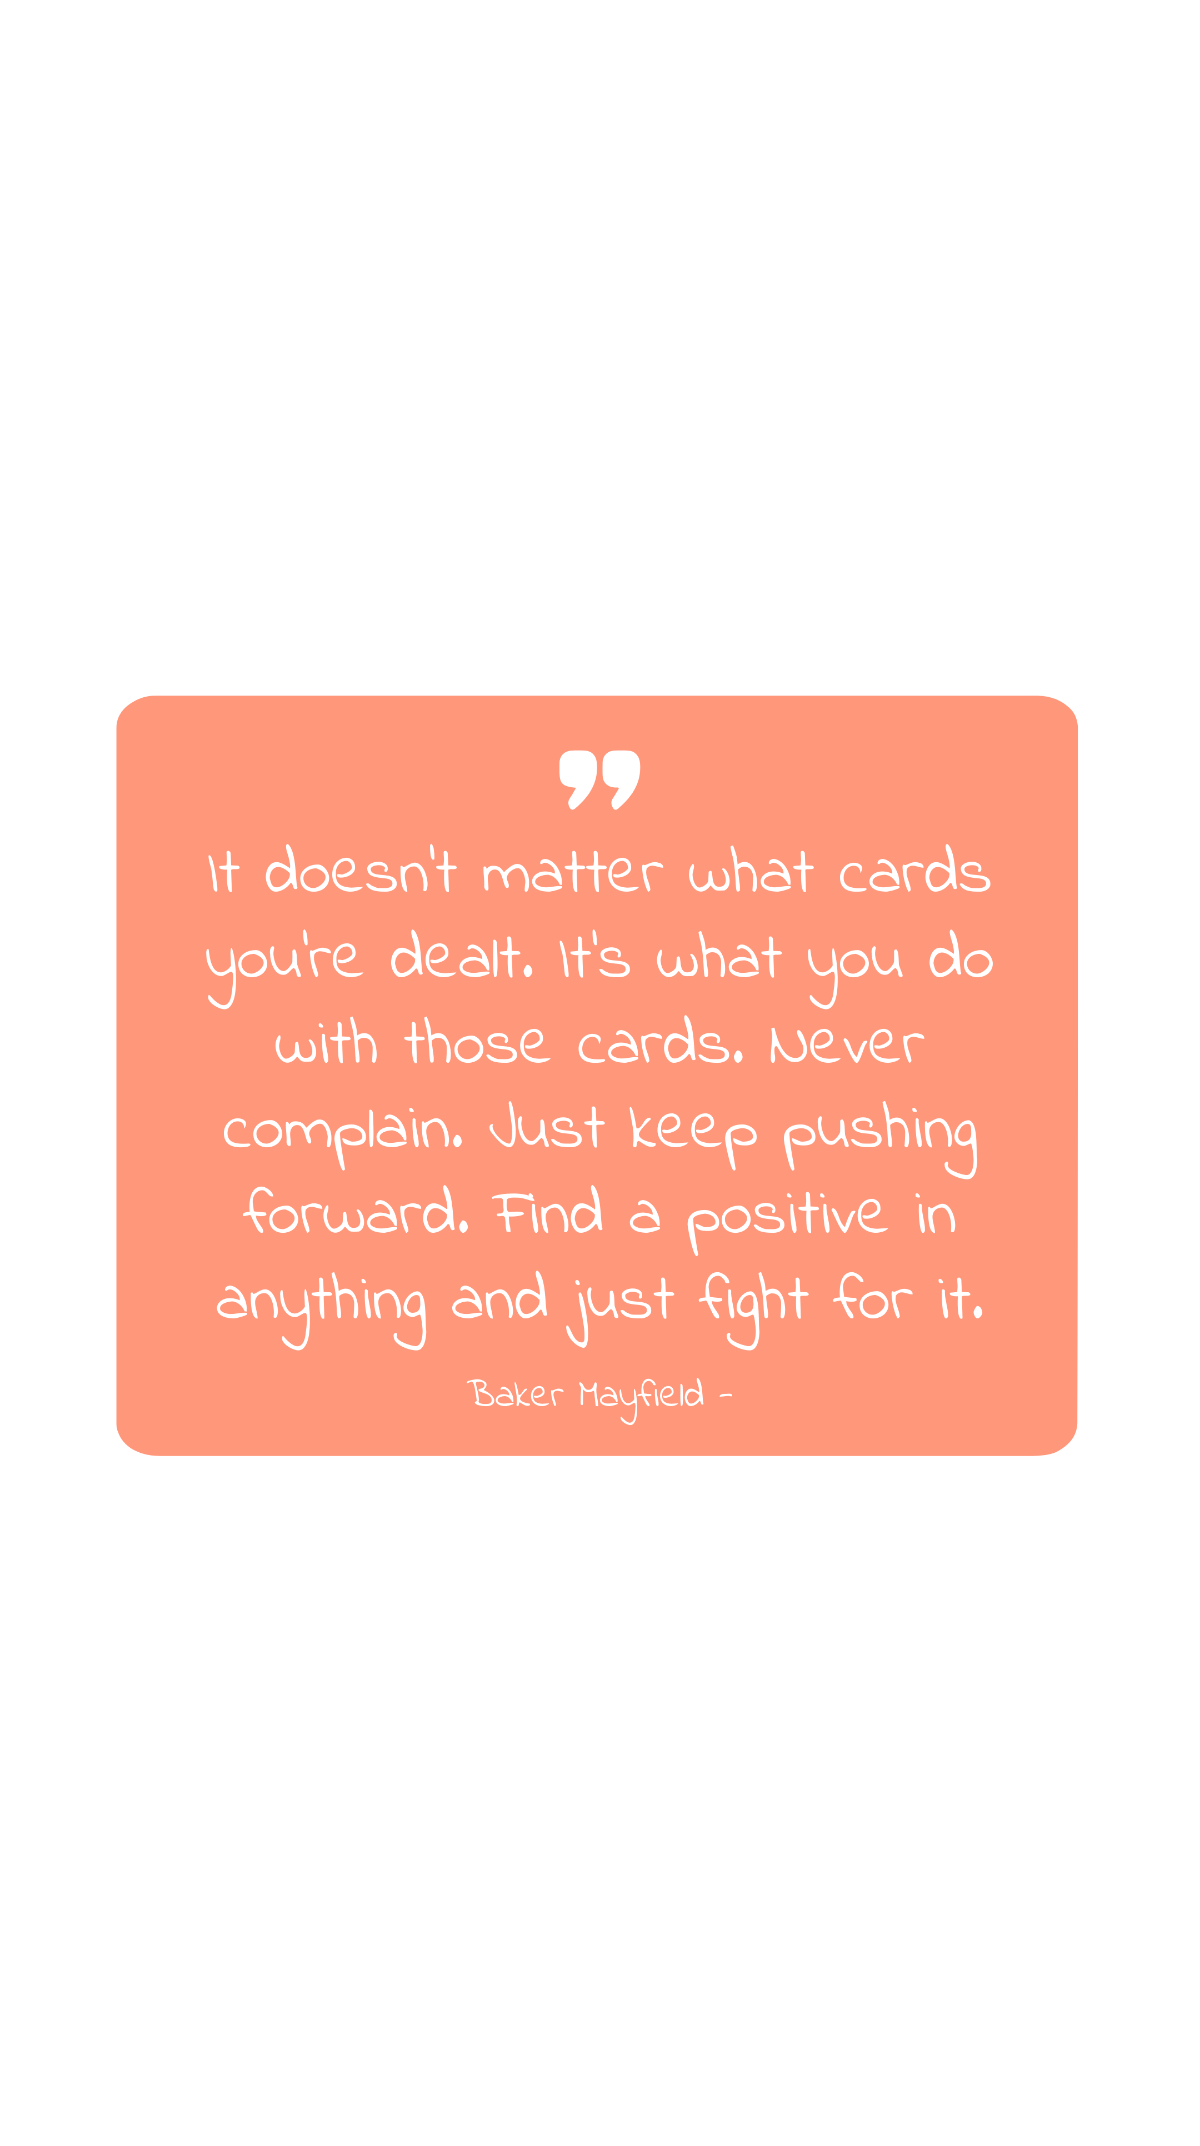 Baker Mayfield - It doesn’t matter what cards you’re dealt. It’s what you do with those cards. Never complain. Just keep pushing forward. Find a positive in anything and just fight for it. Template